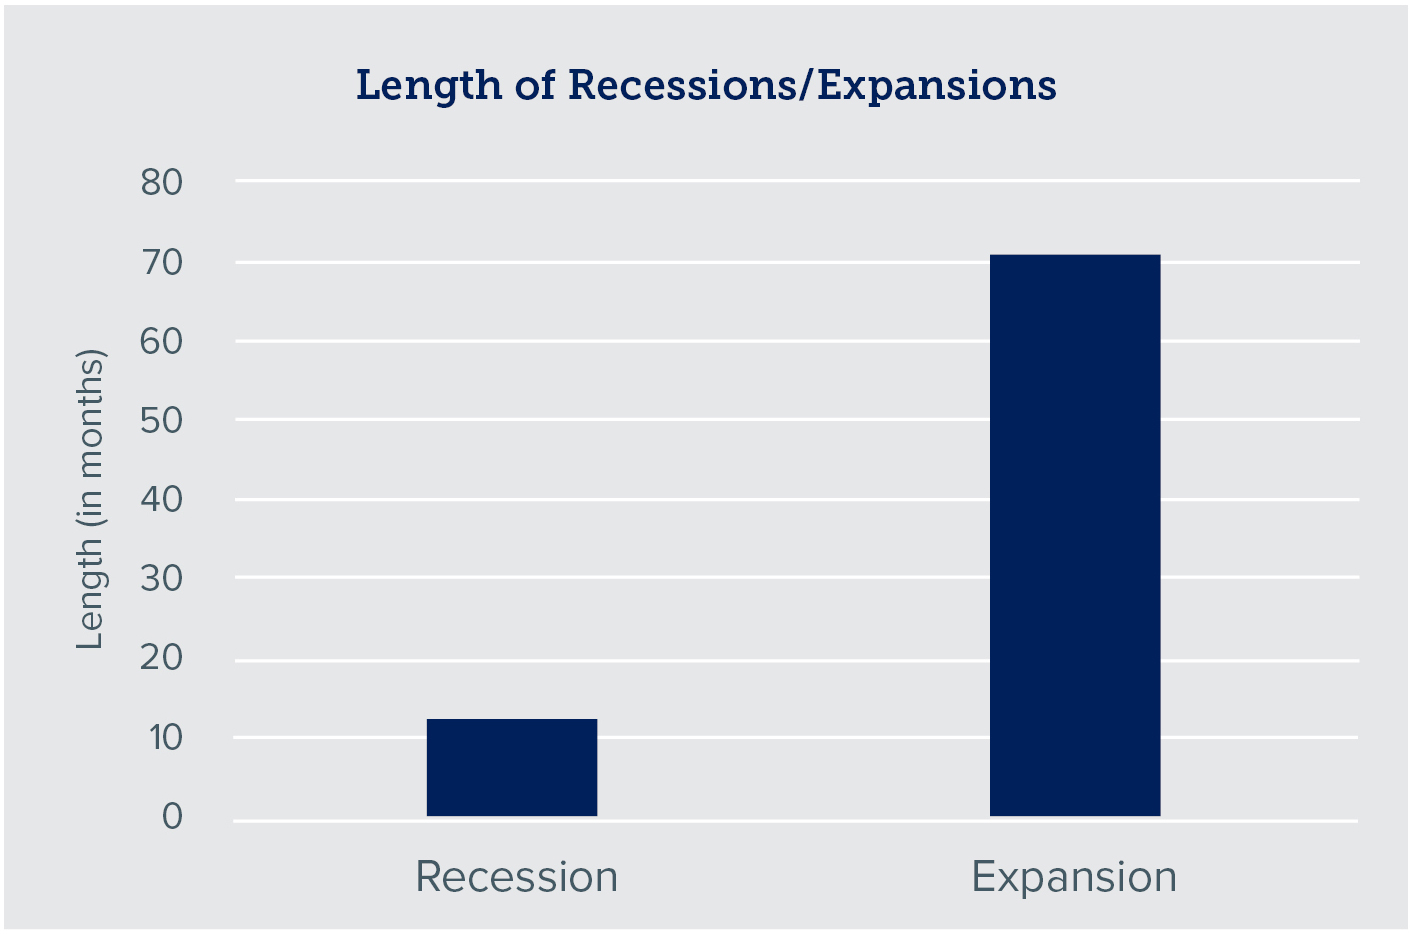 Bar graph of length of recessions vs. expansions in months